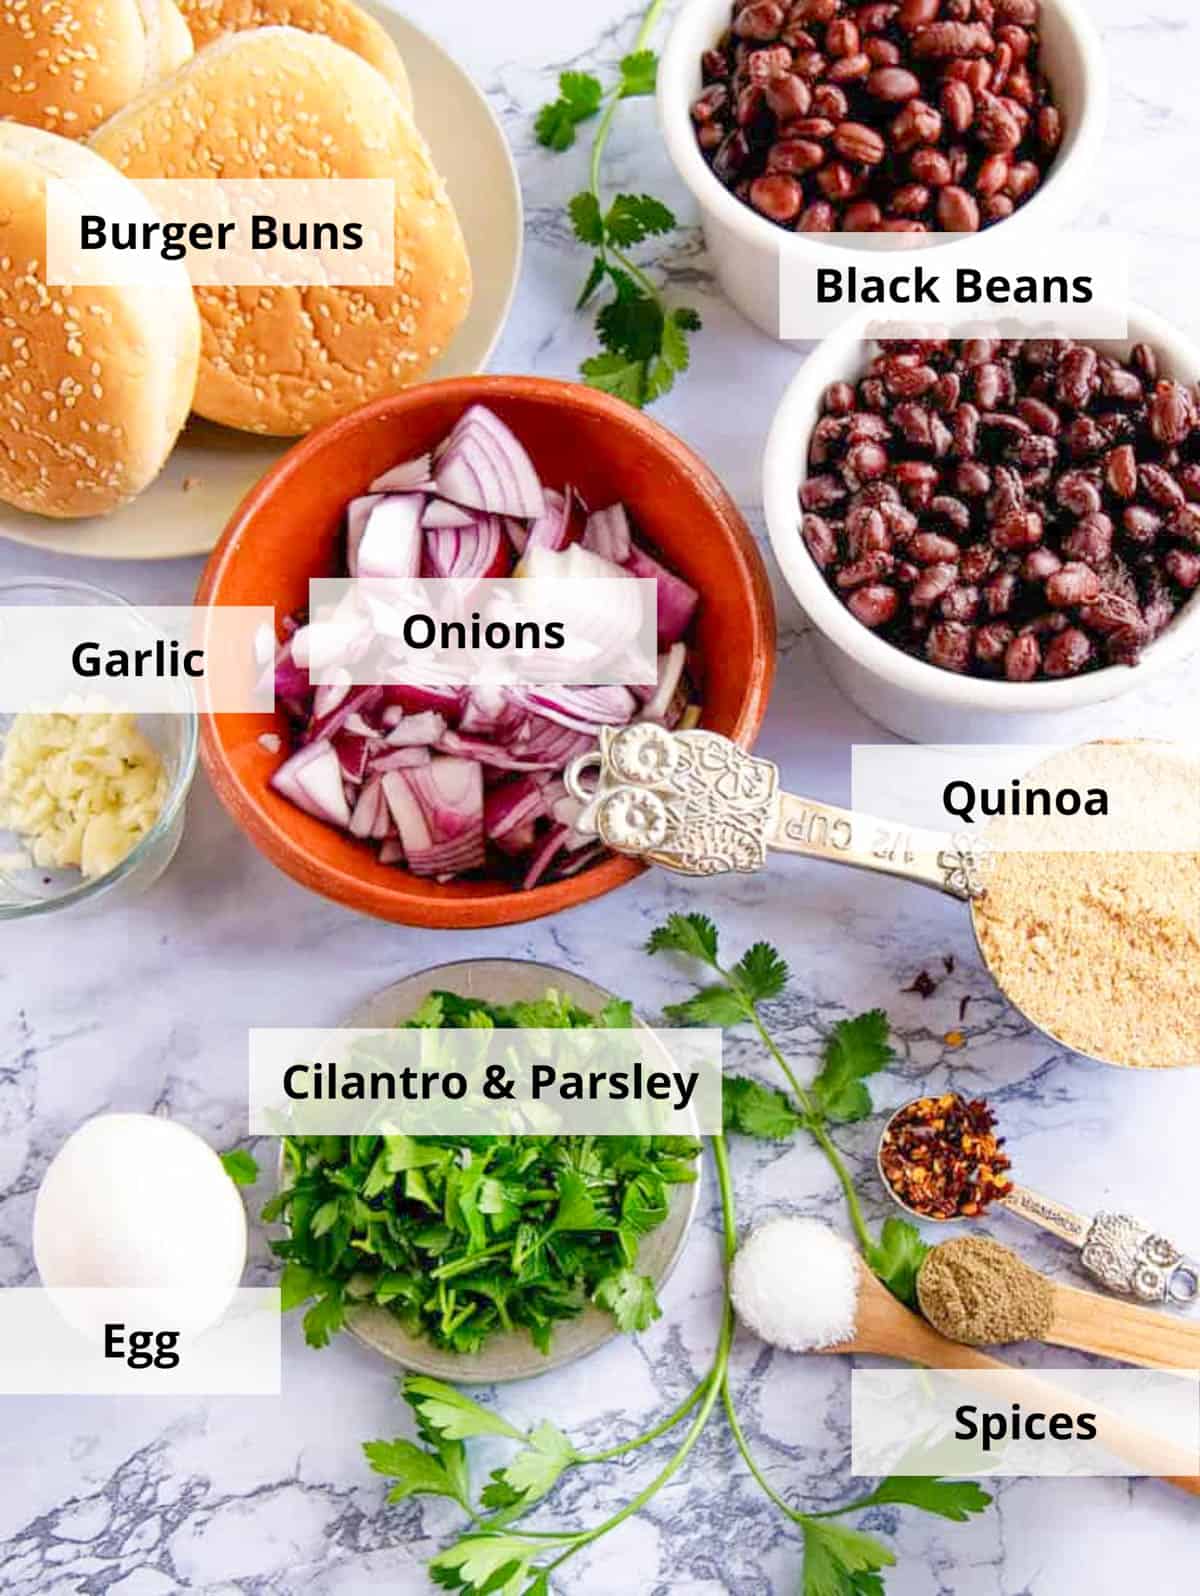 Ingredients for black bean quinoa burger recipe on a white background.